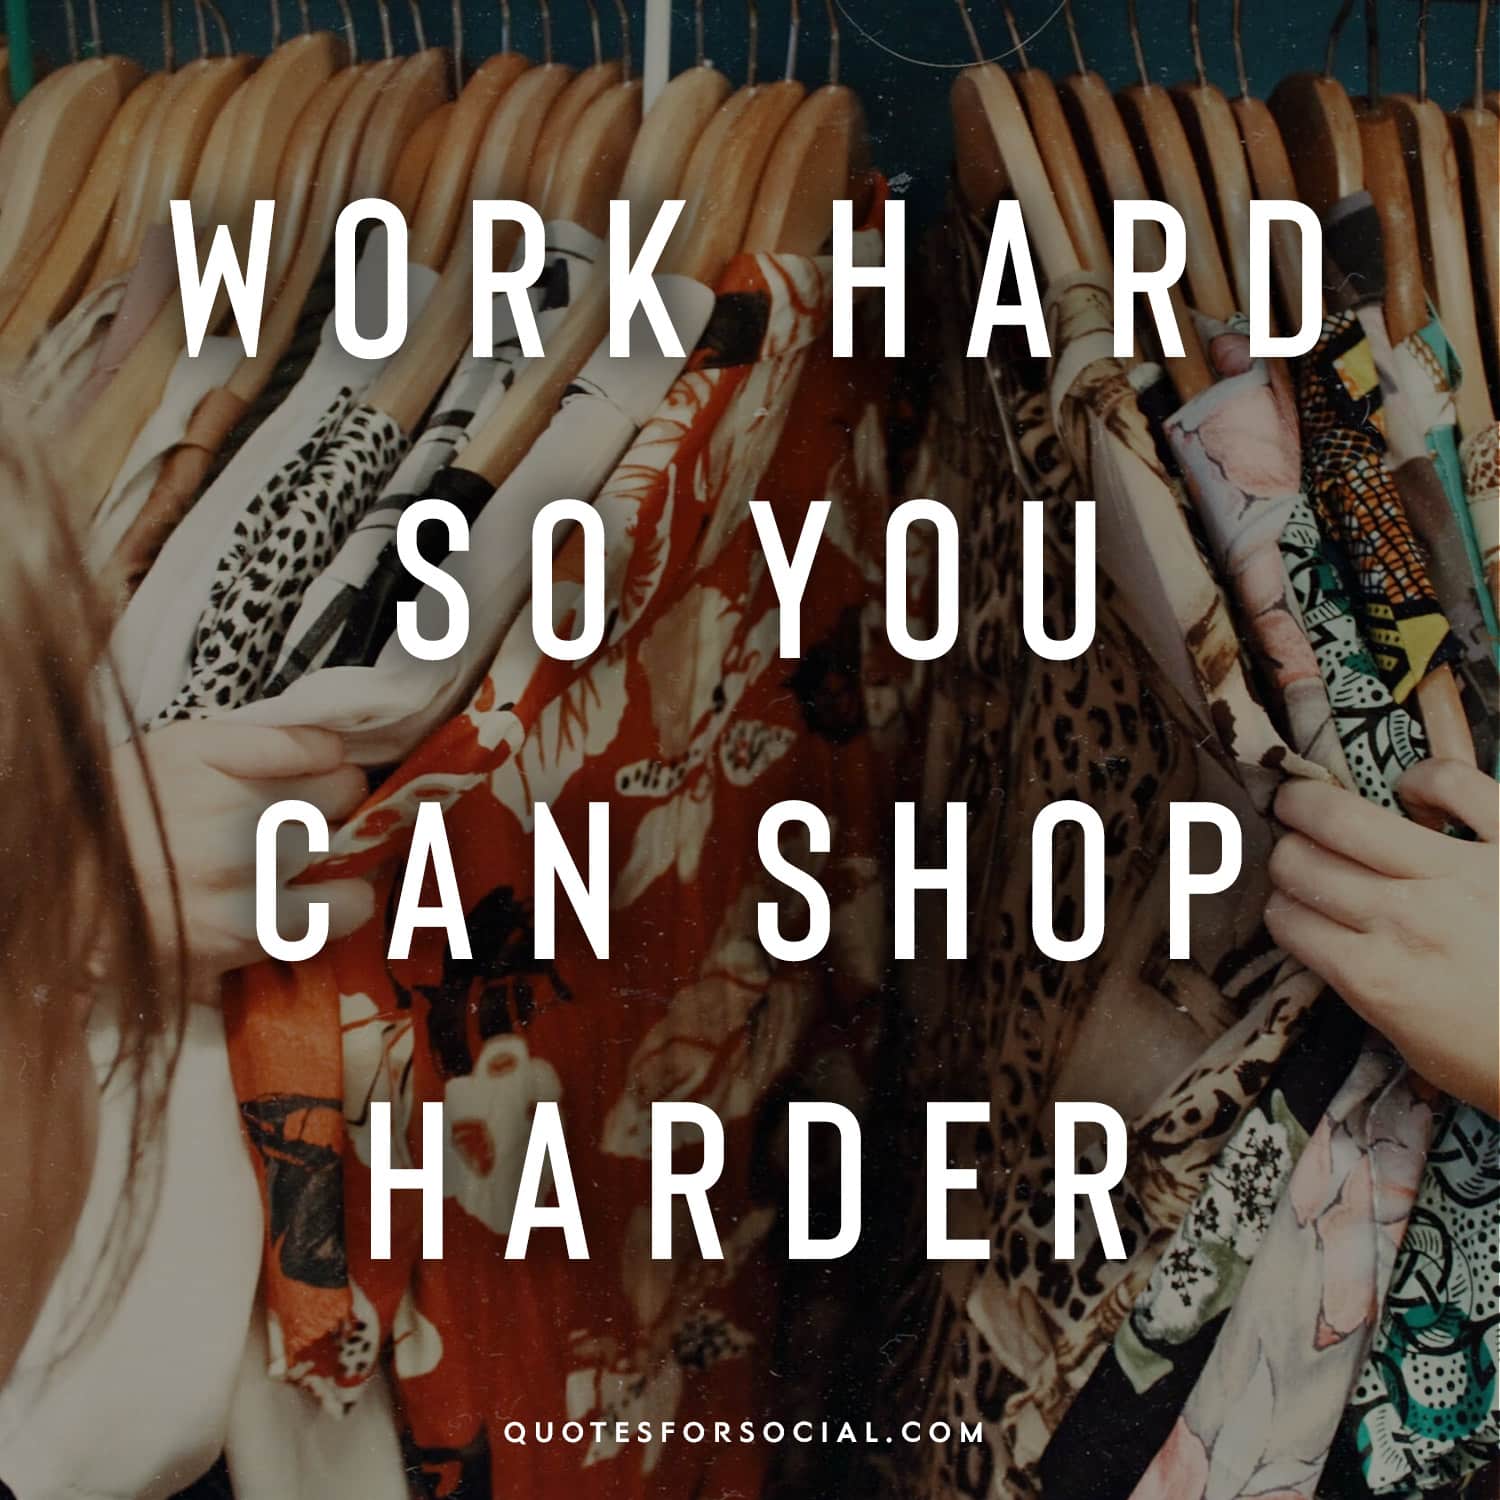 Shopping Quotes for Instagram